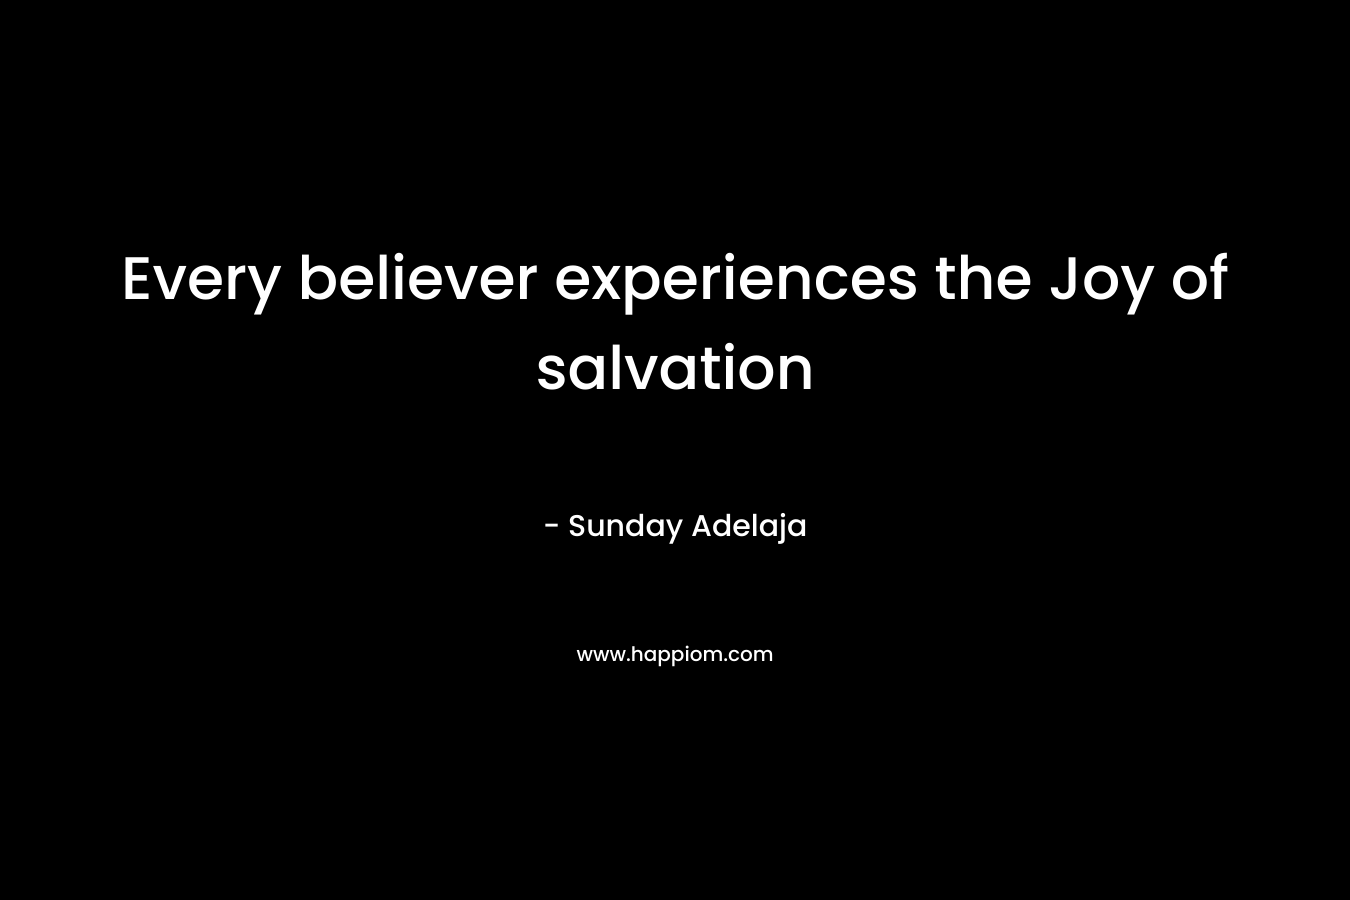 Every believer experiences the Joy of salvation